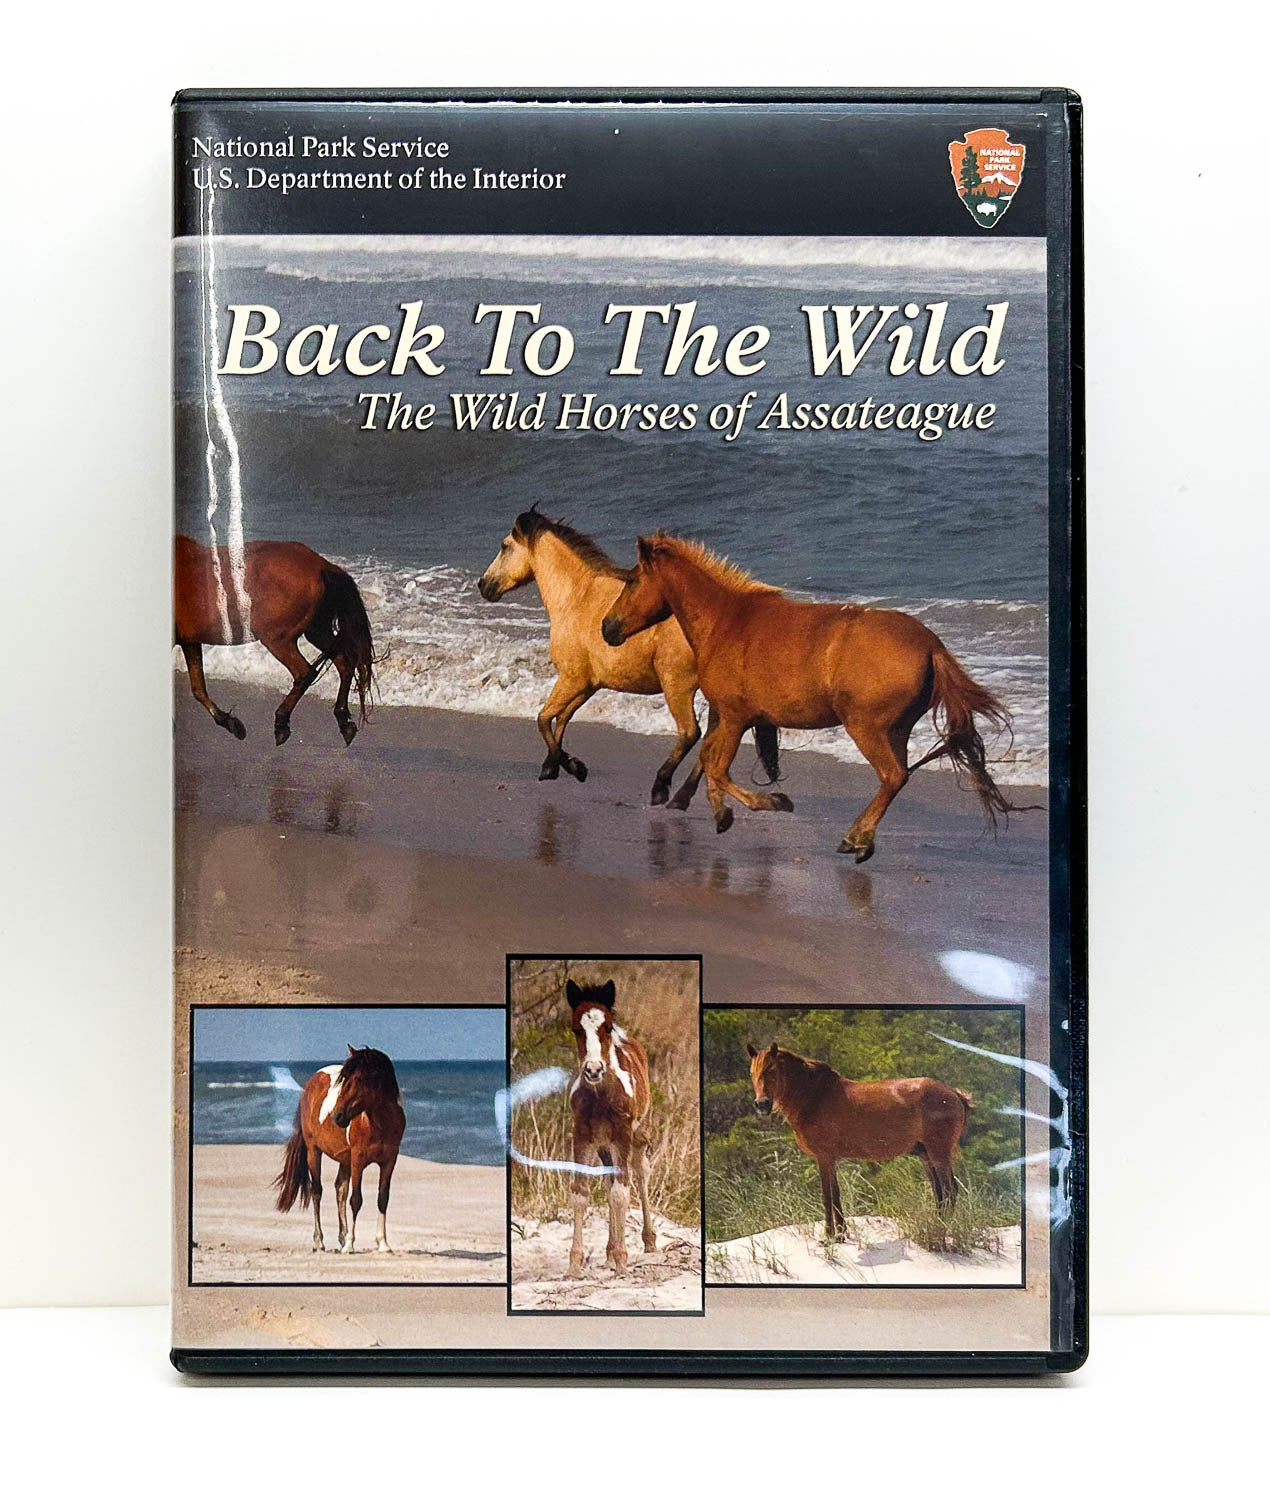 DVD:  Back To The Wild: The Wild Horses of Assateague